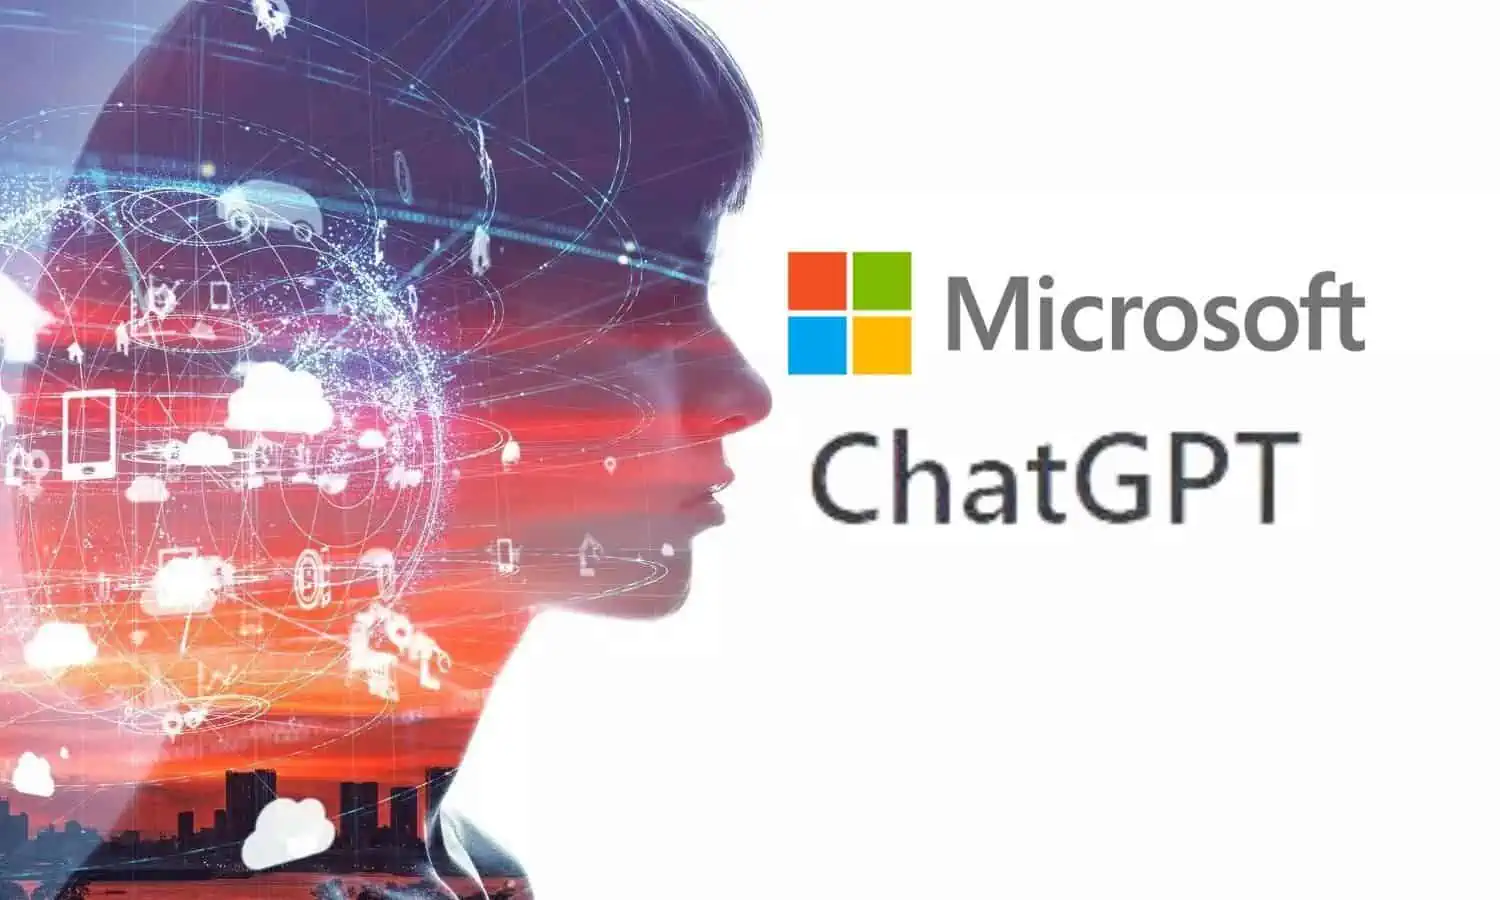 Microsoft Tries Chatgpt On Robots And The Results Are Impressive